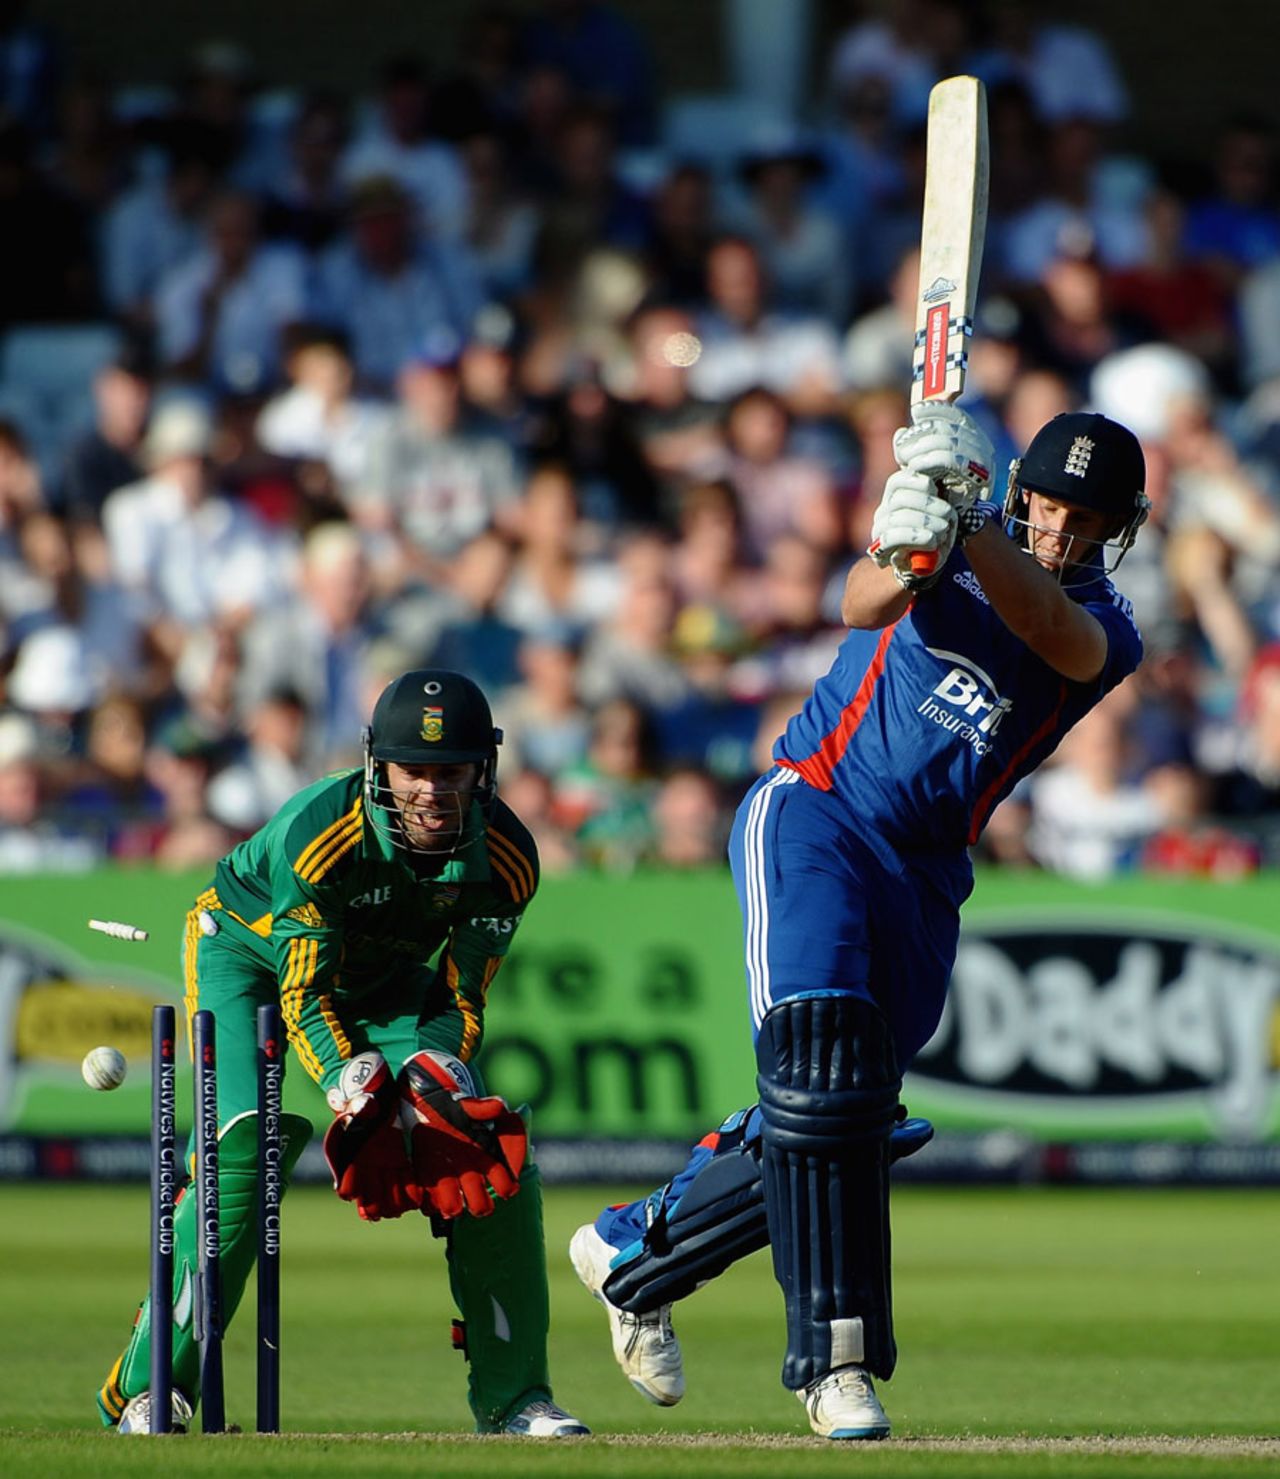 James Tredwell was bowled playing across the line, England v South Africa, 5th NatWest ODI, Trent Bridge, September, 5, 2012